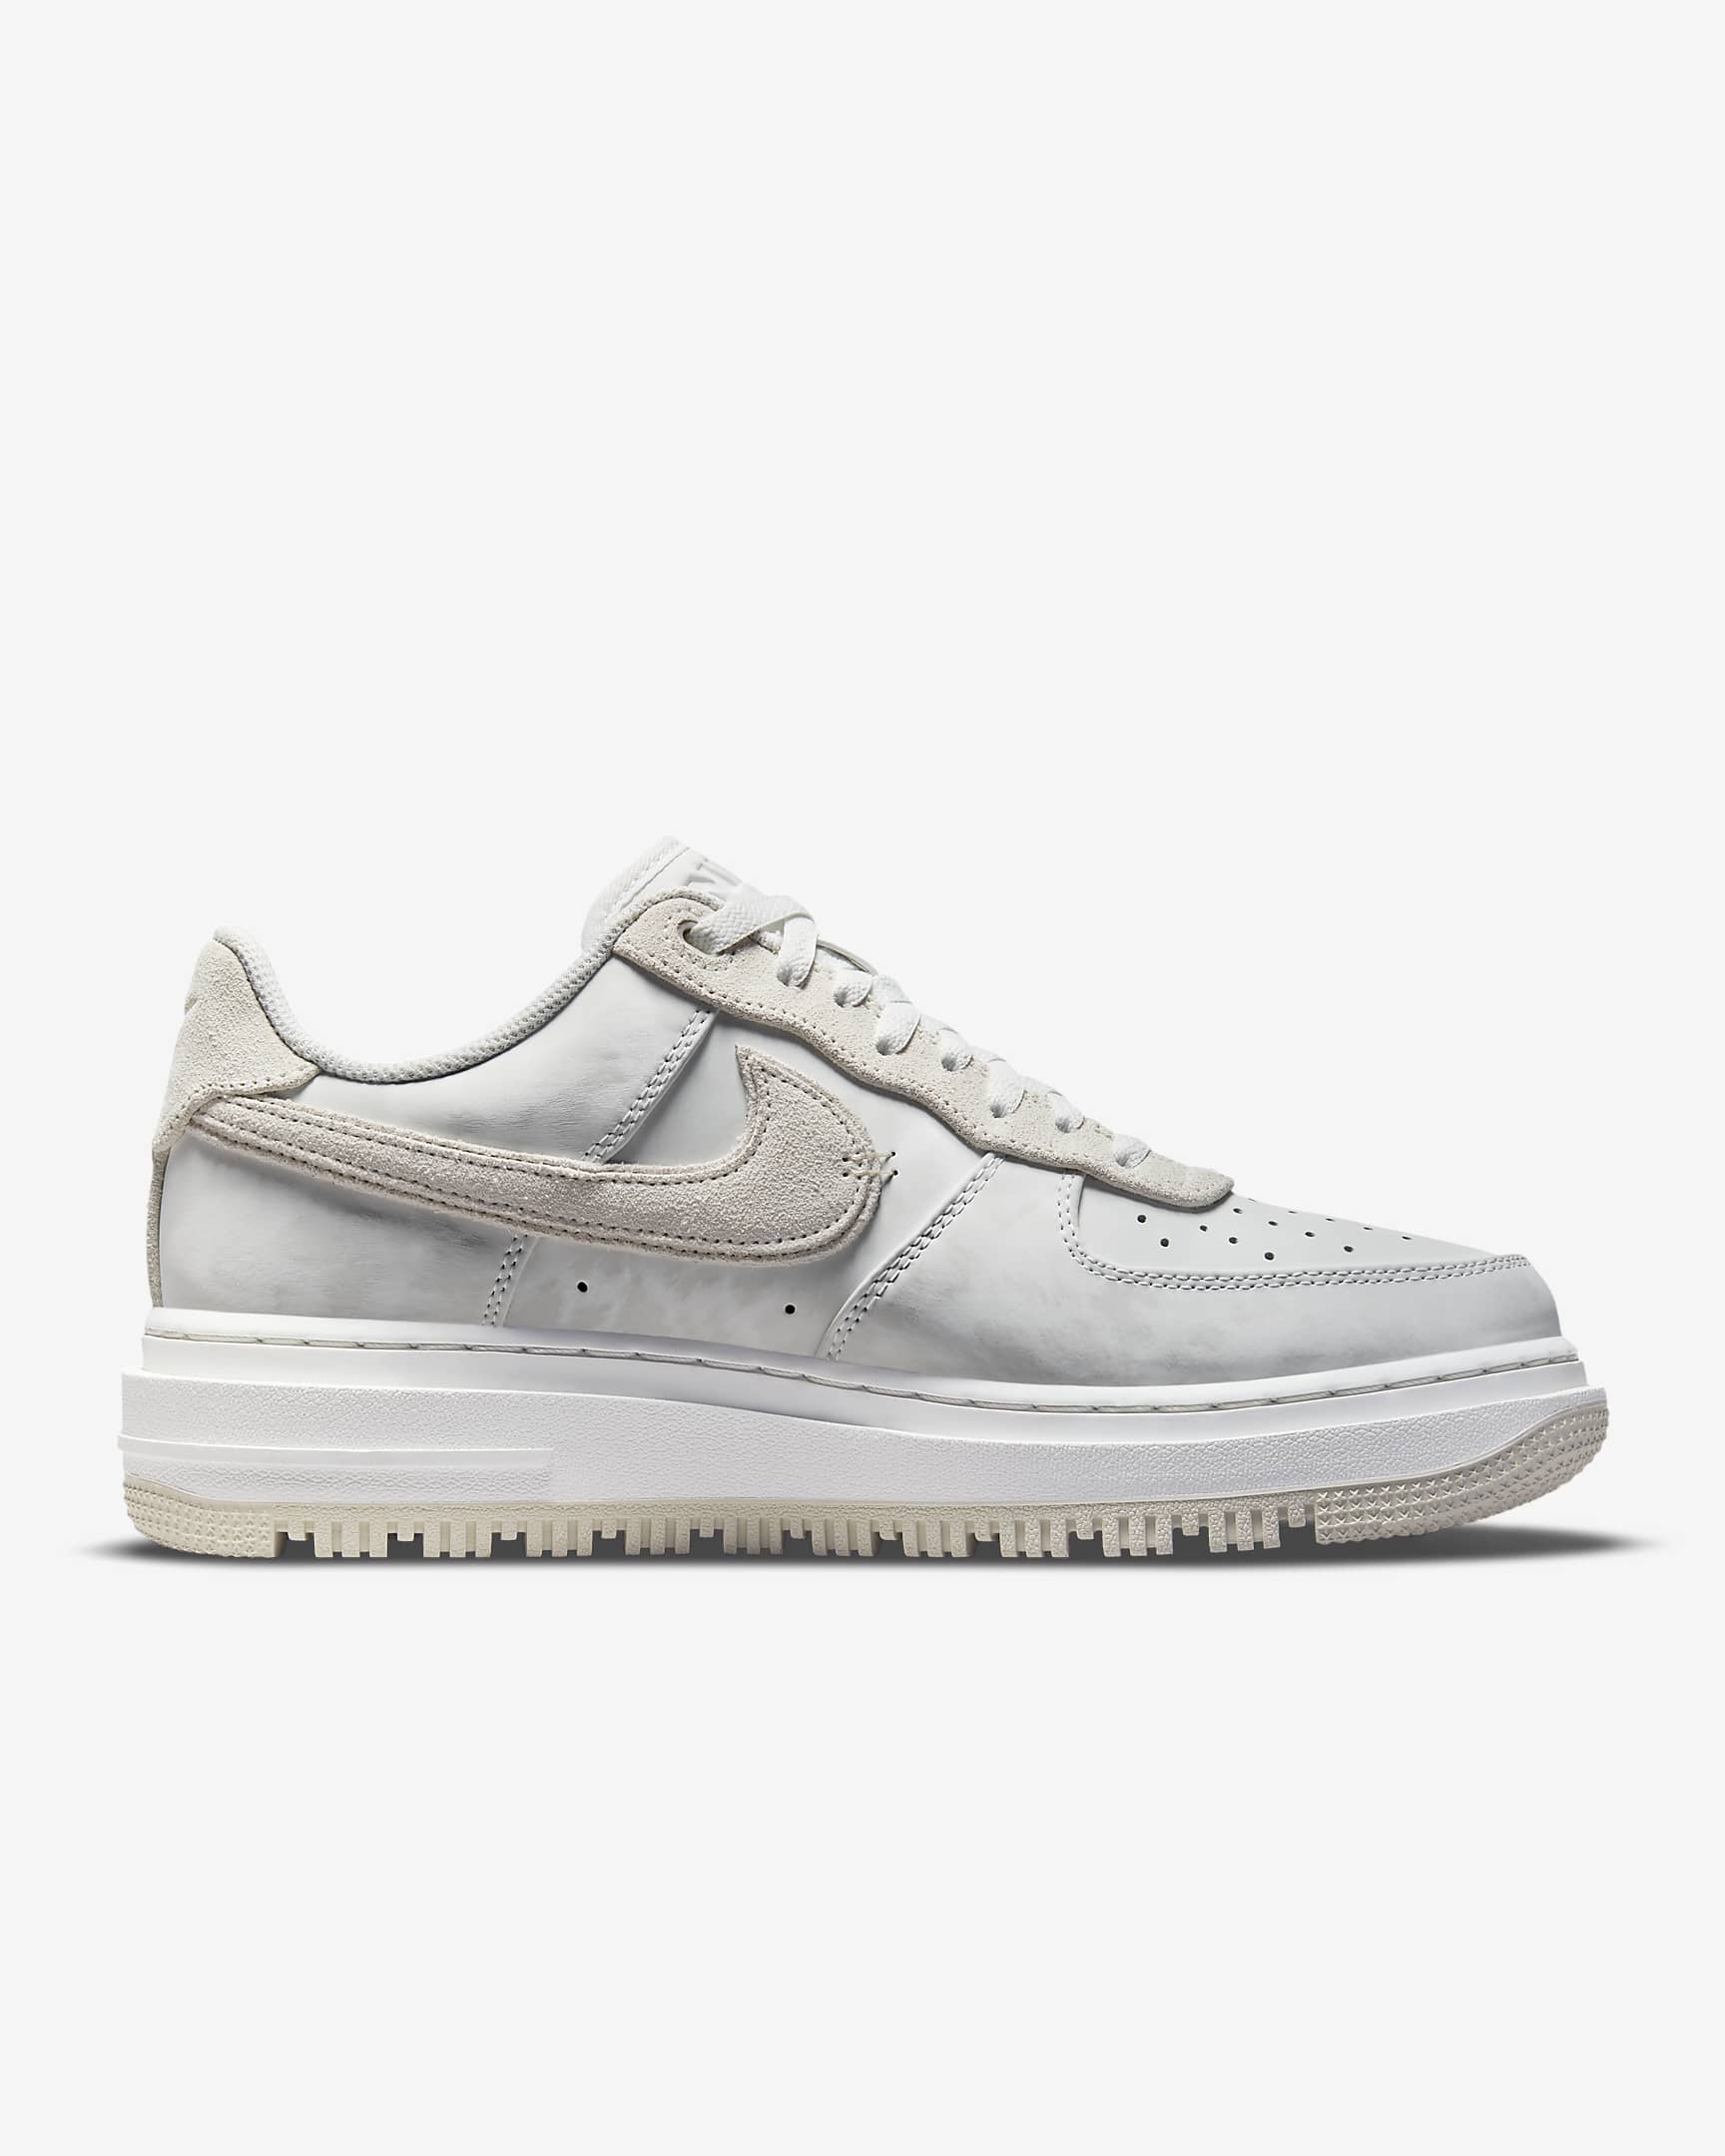 Nike Air Force 1 Luxe Men's Shoes - Summit White/Light Bone/Summit White